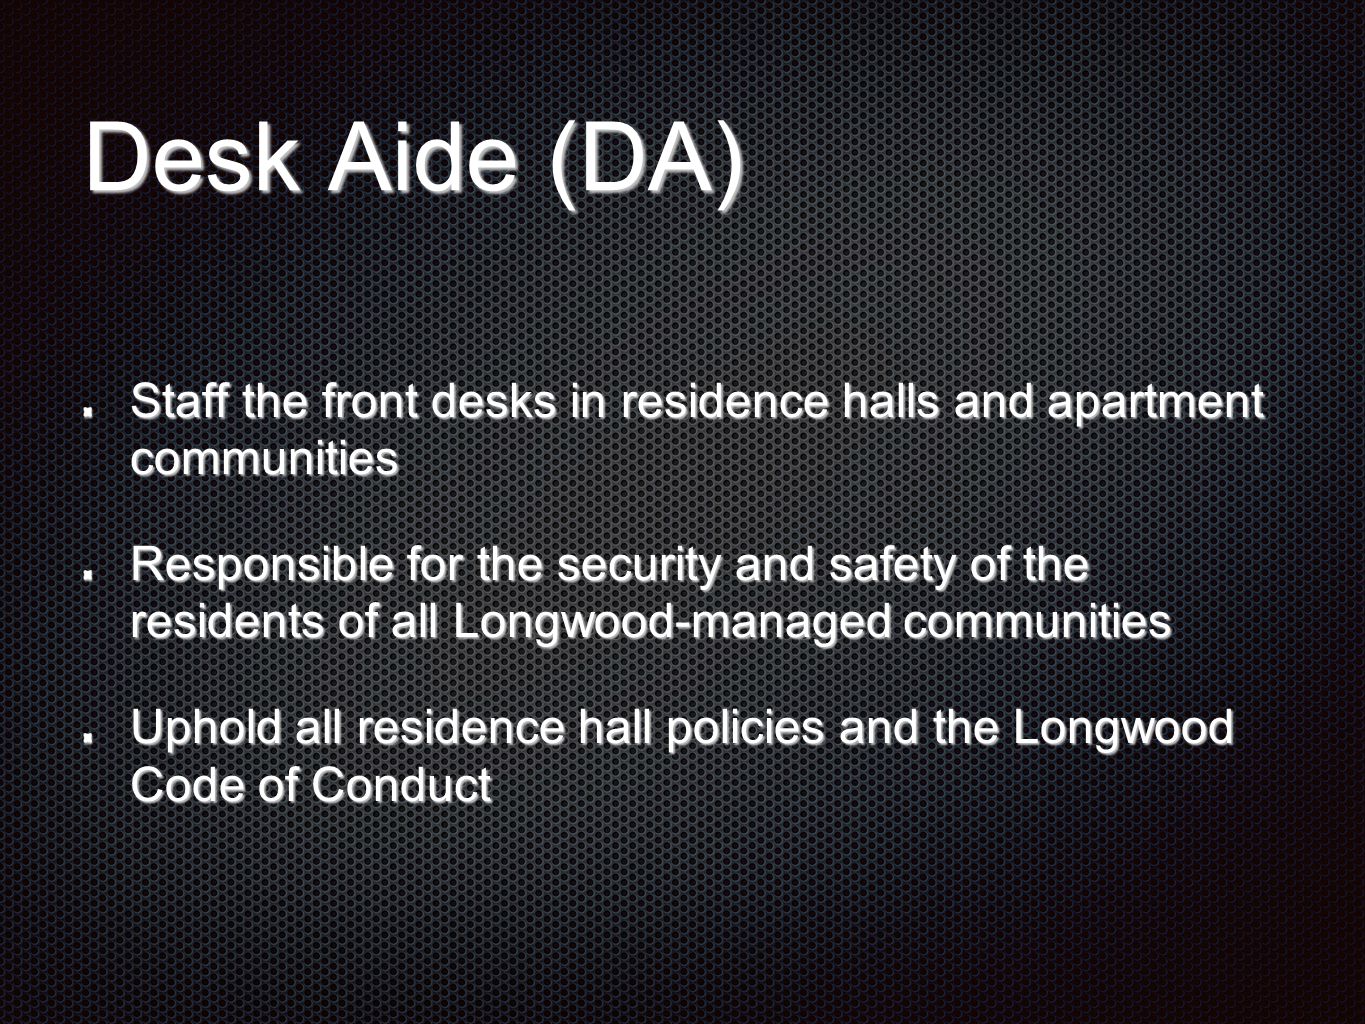 Desk Aide (DA) Staff the front desks in residence halls and apartment communities Responsible for the security and safety of the residents of all Longwood-managed communities Uphold all residence hall policies and the Longwood Code of Conduct